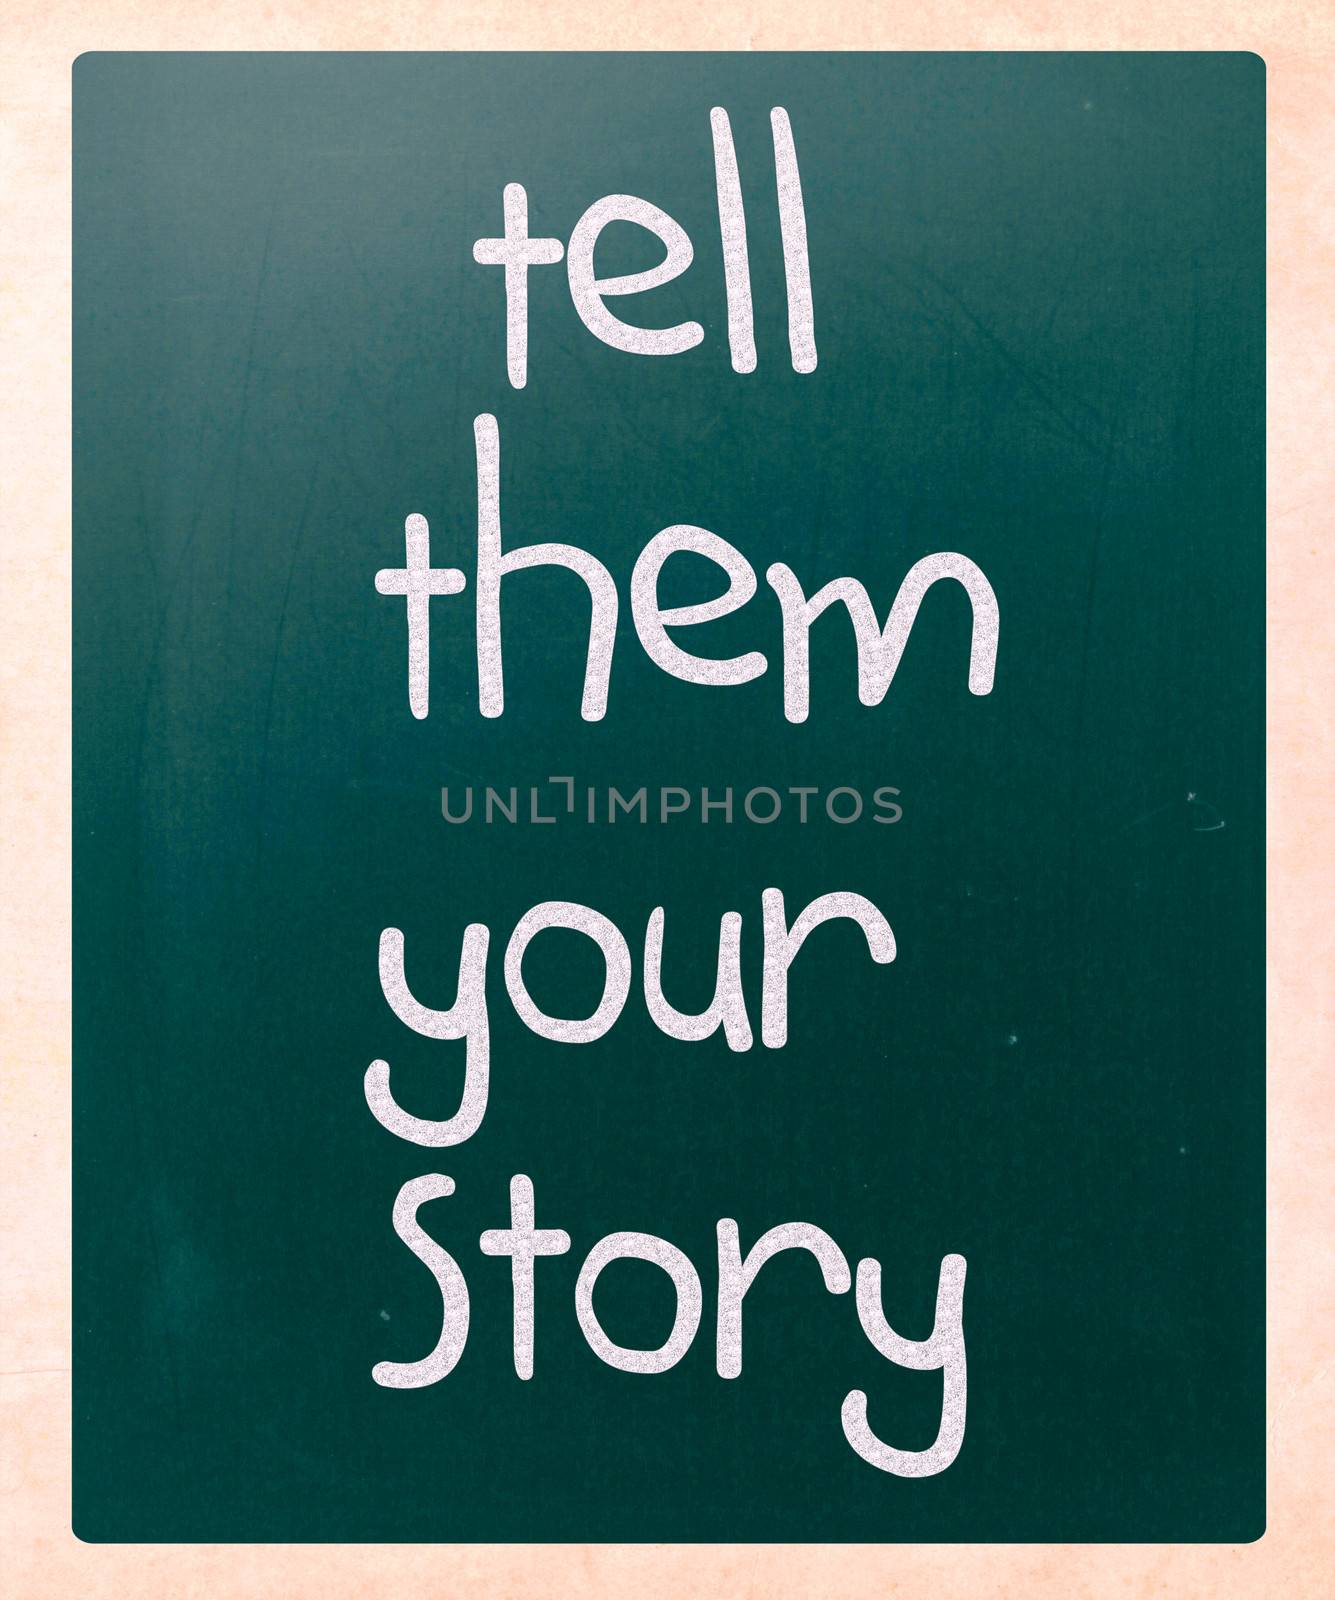 "Tell them your story" handwritten with white chalk on a blackboard